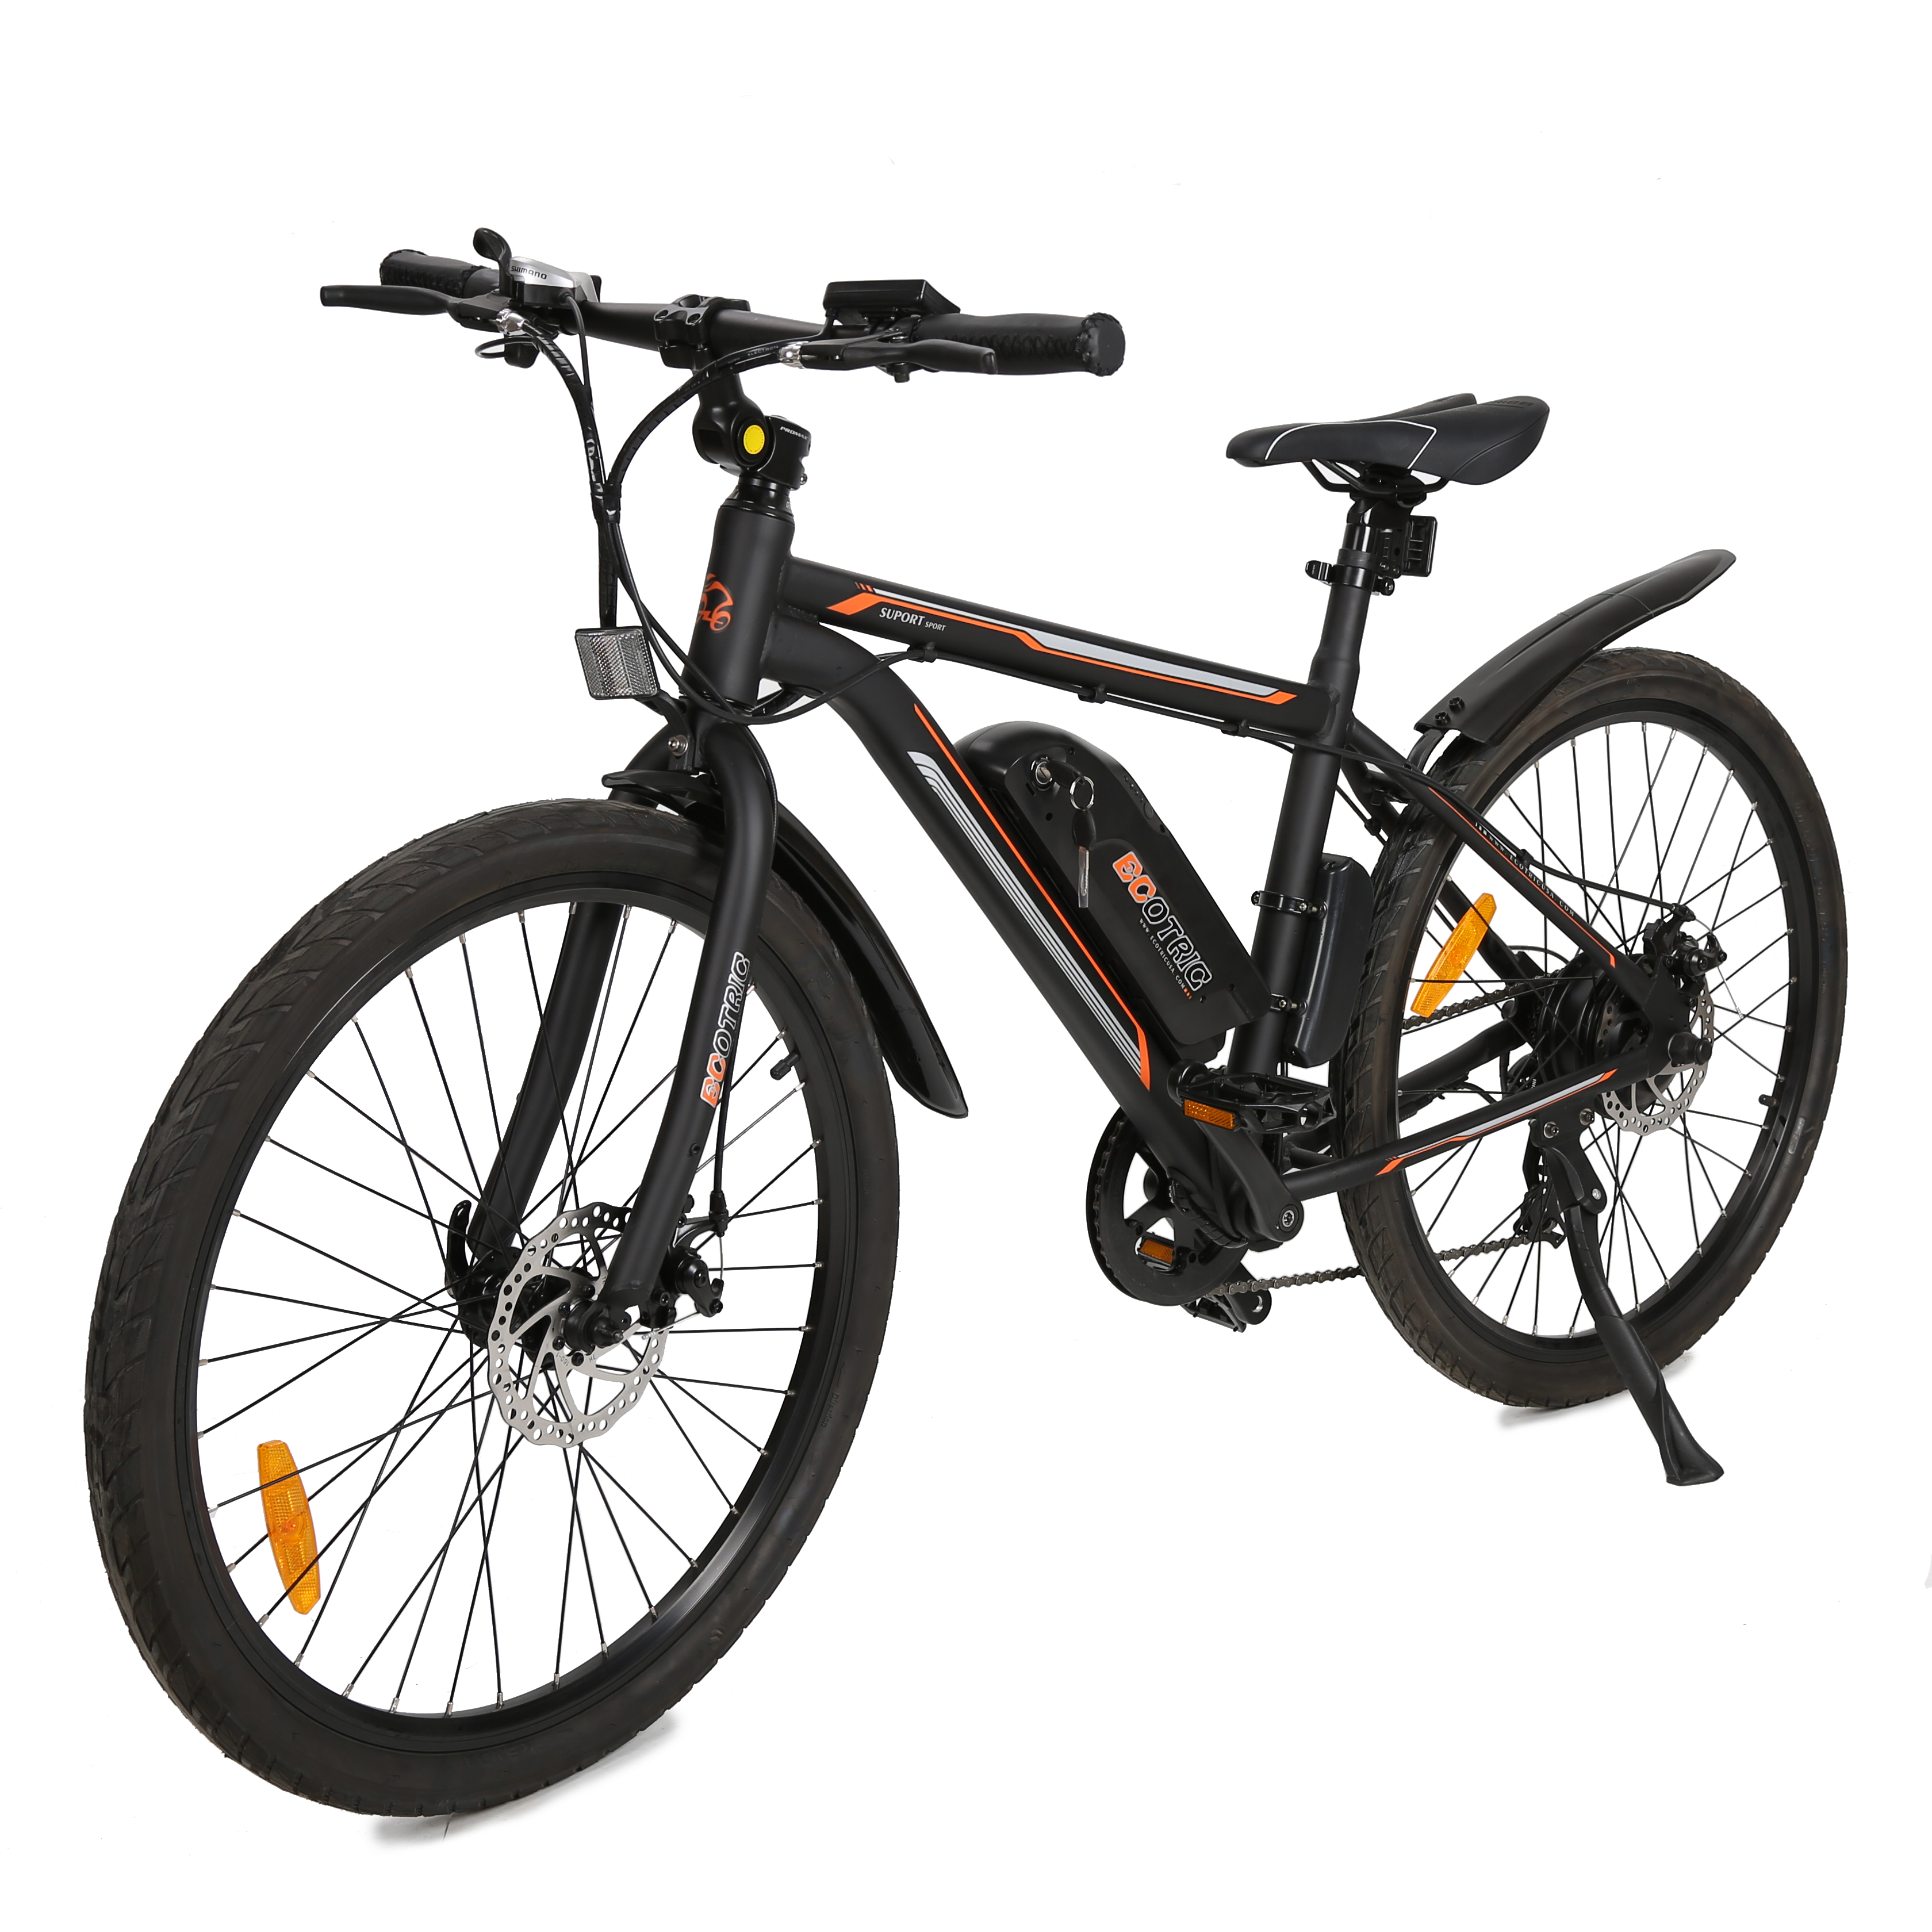 Whirlwind cheap electric bike for sale